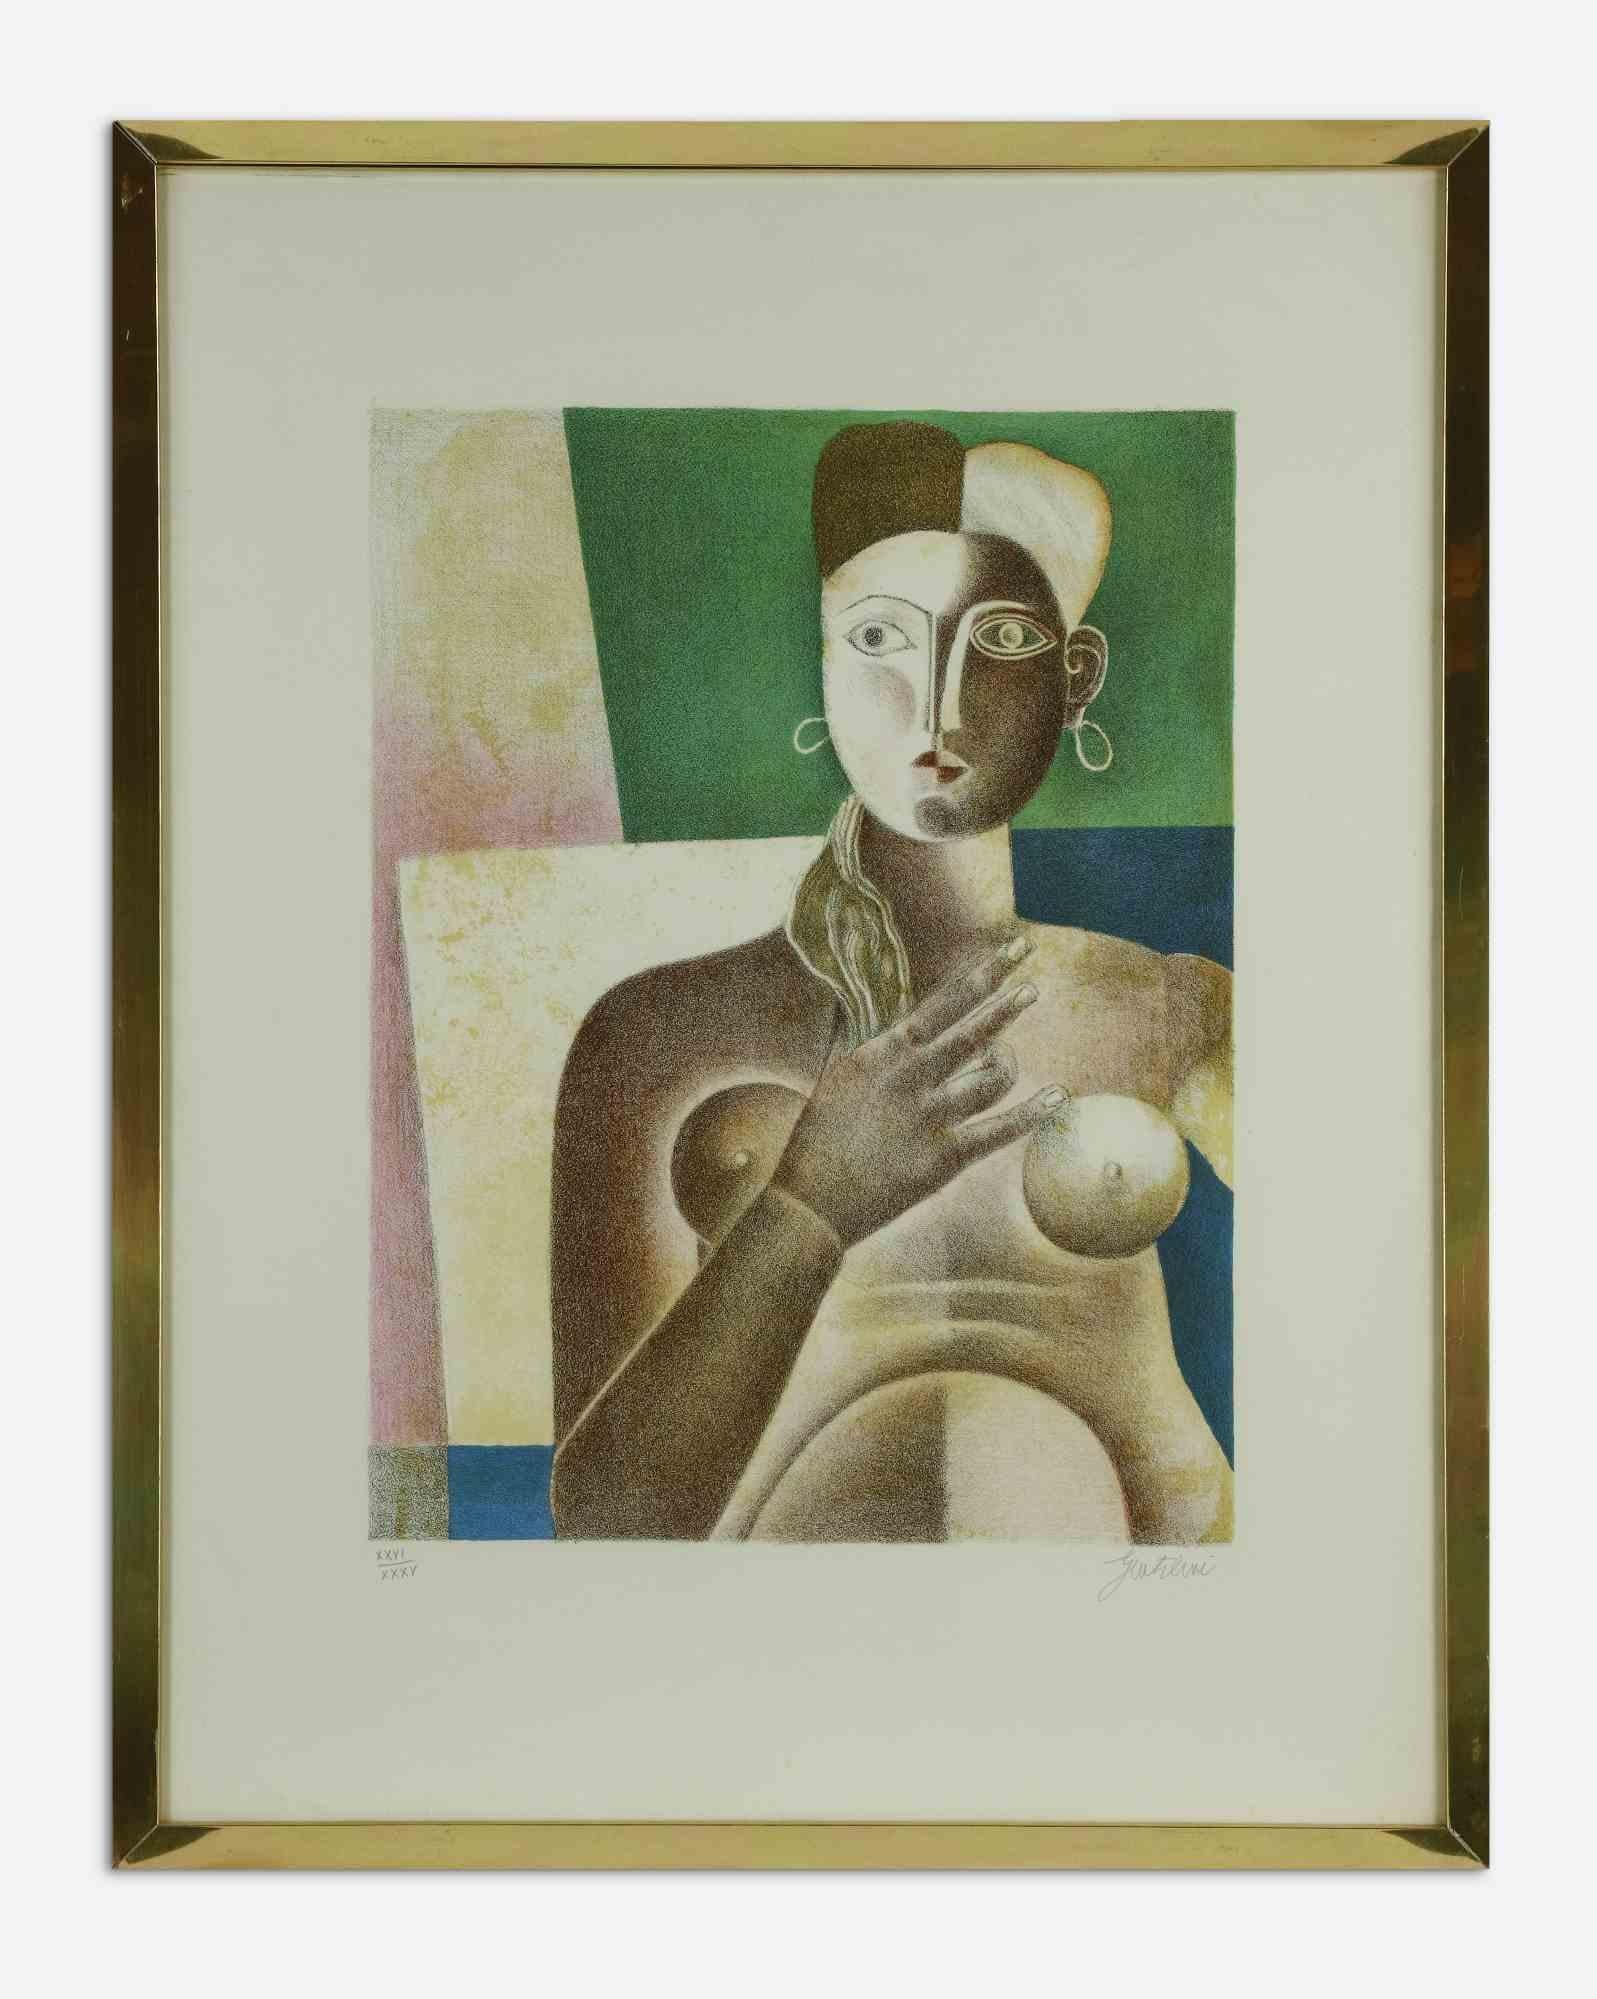 Face is an original contemporary artwork realized by Franco Gentilini in 1970s.

Mixed colored lithograph.

Hand signed and numbered on the lower margin.

Edition of XXVI/XXXV.

Includes frame: 74 x 1.5 x 58 cm